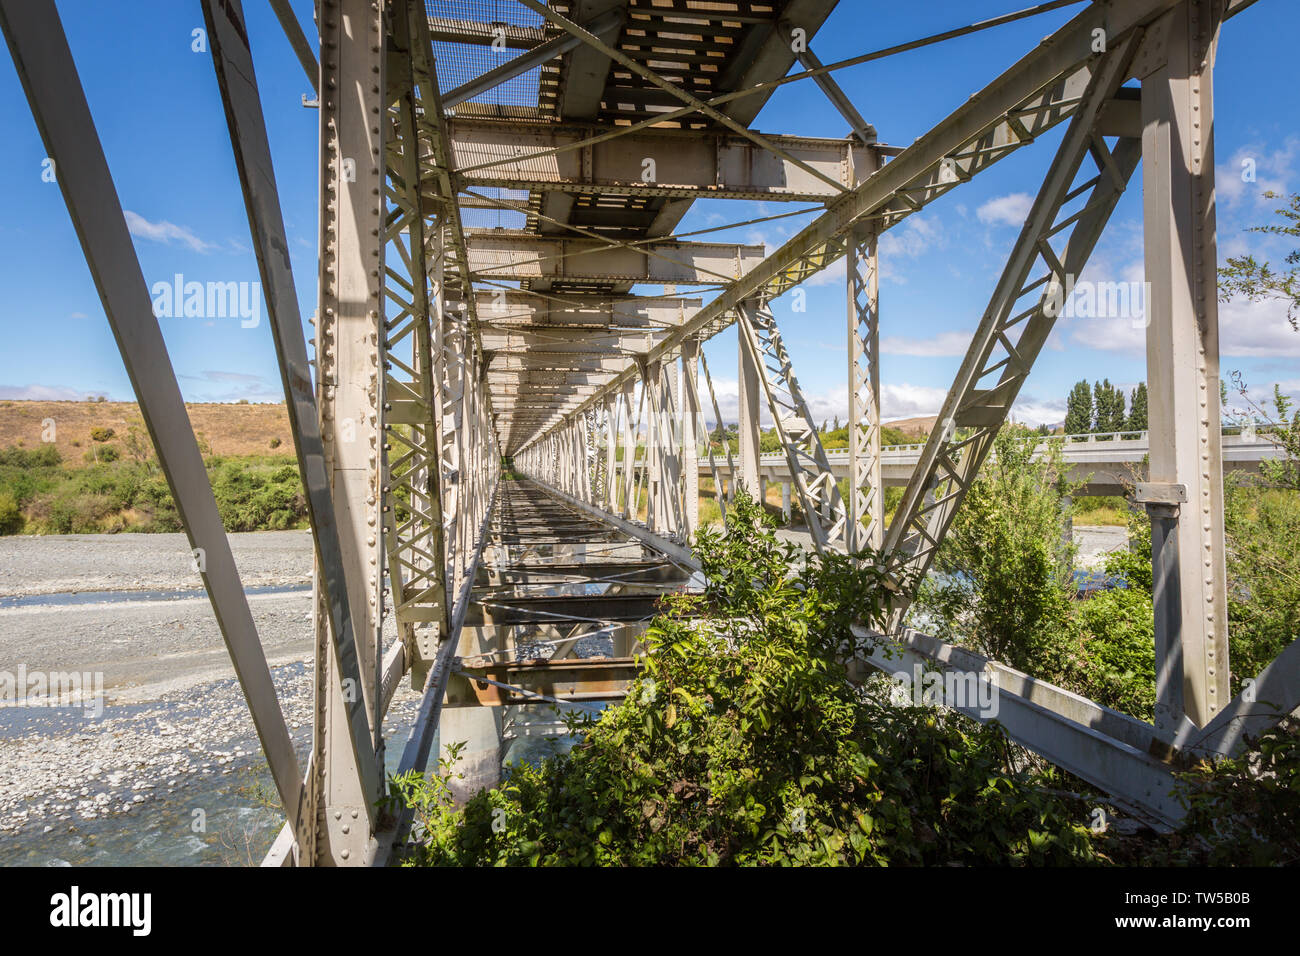 The inside view of a steel railway bridge, a part of the scenic railway route on the South Island, New Zealand Stock Photo